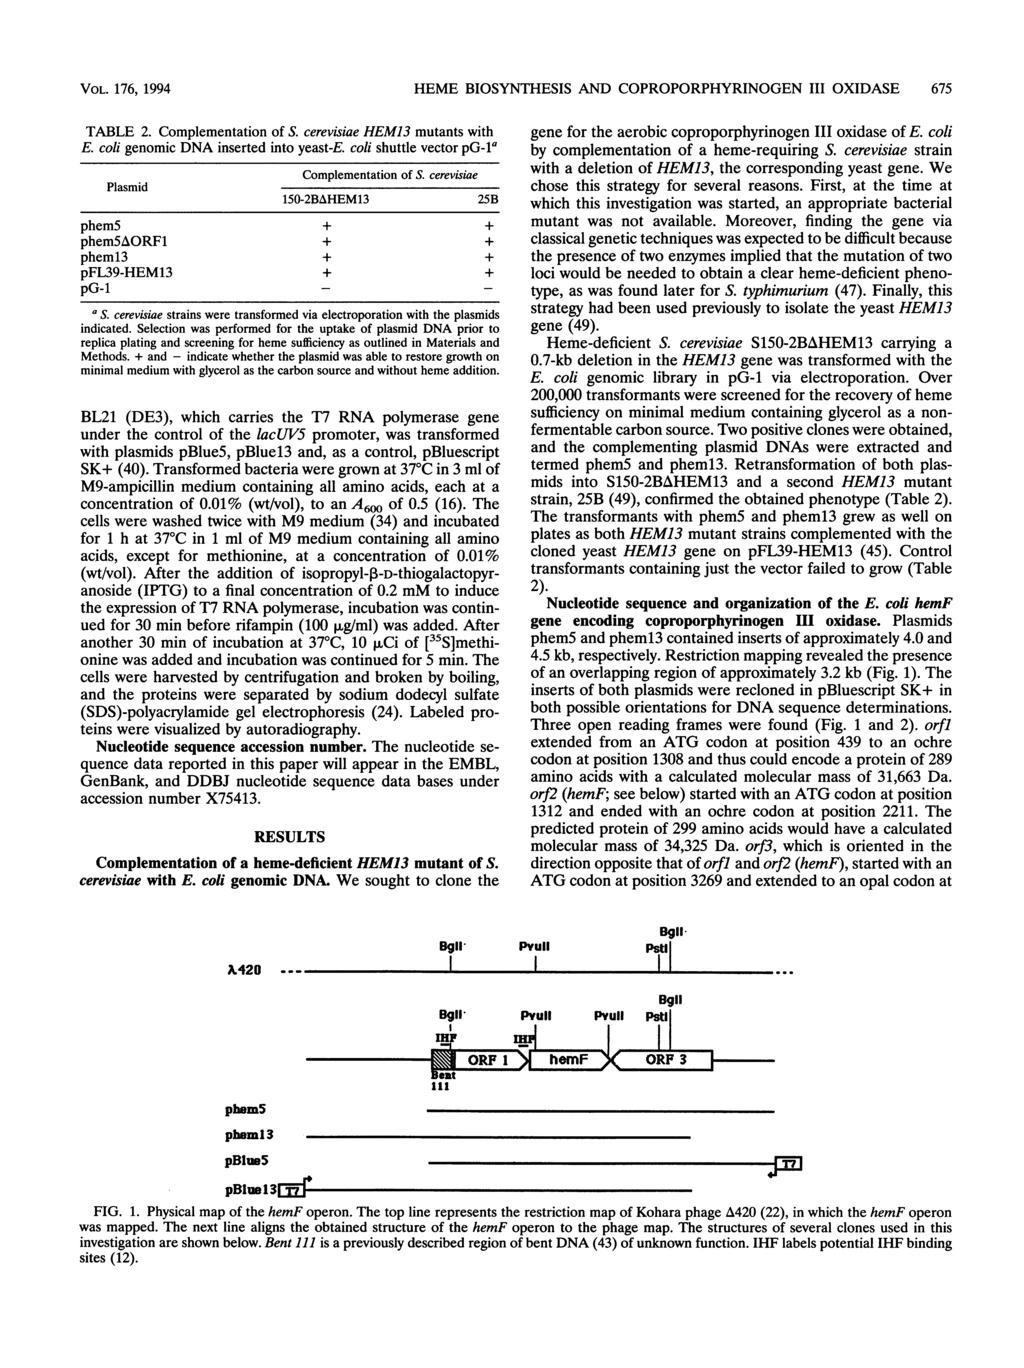 VOL. 176, 1994 HEME BIOSYNTHESIS AND COPROPORPHYRINOGEN III OXIDASE 675 TABLE 2. Complementation of S. cerevisiae HEM13 mutants with E. coli genomic DNA inserted into yeast-e.